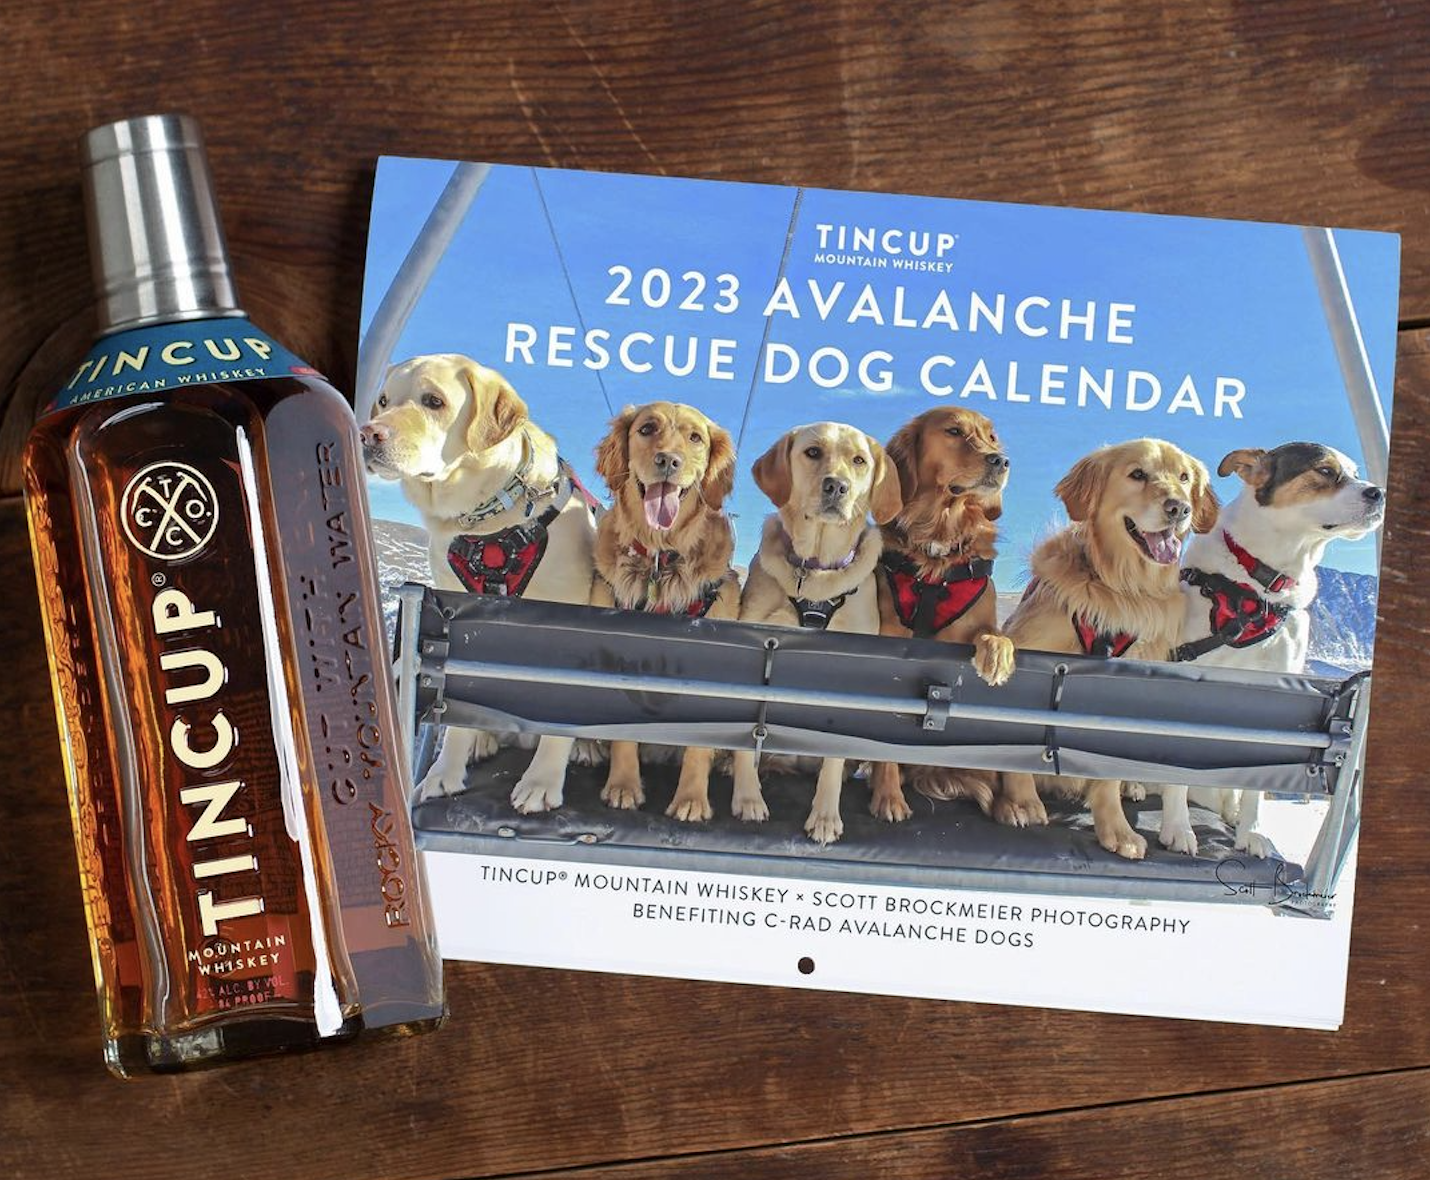 TINCUP Whiskey Releases 2023 Avalanche Rescue Dog Calendar